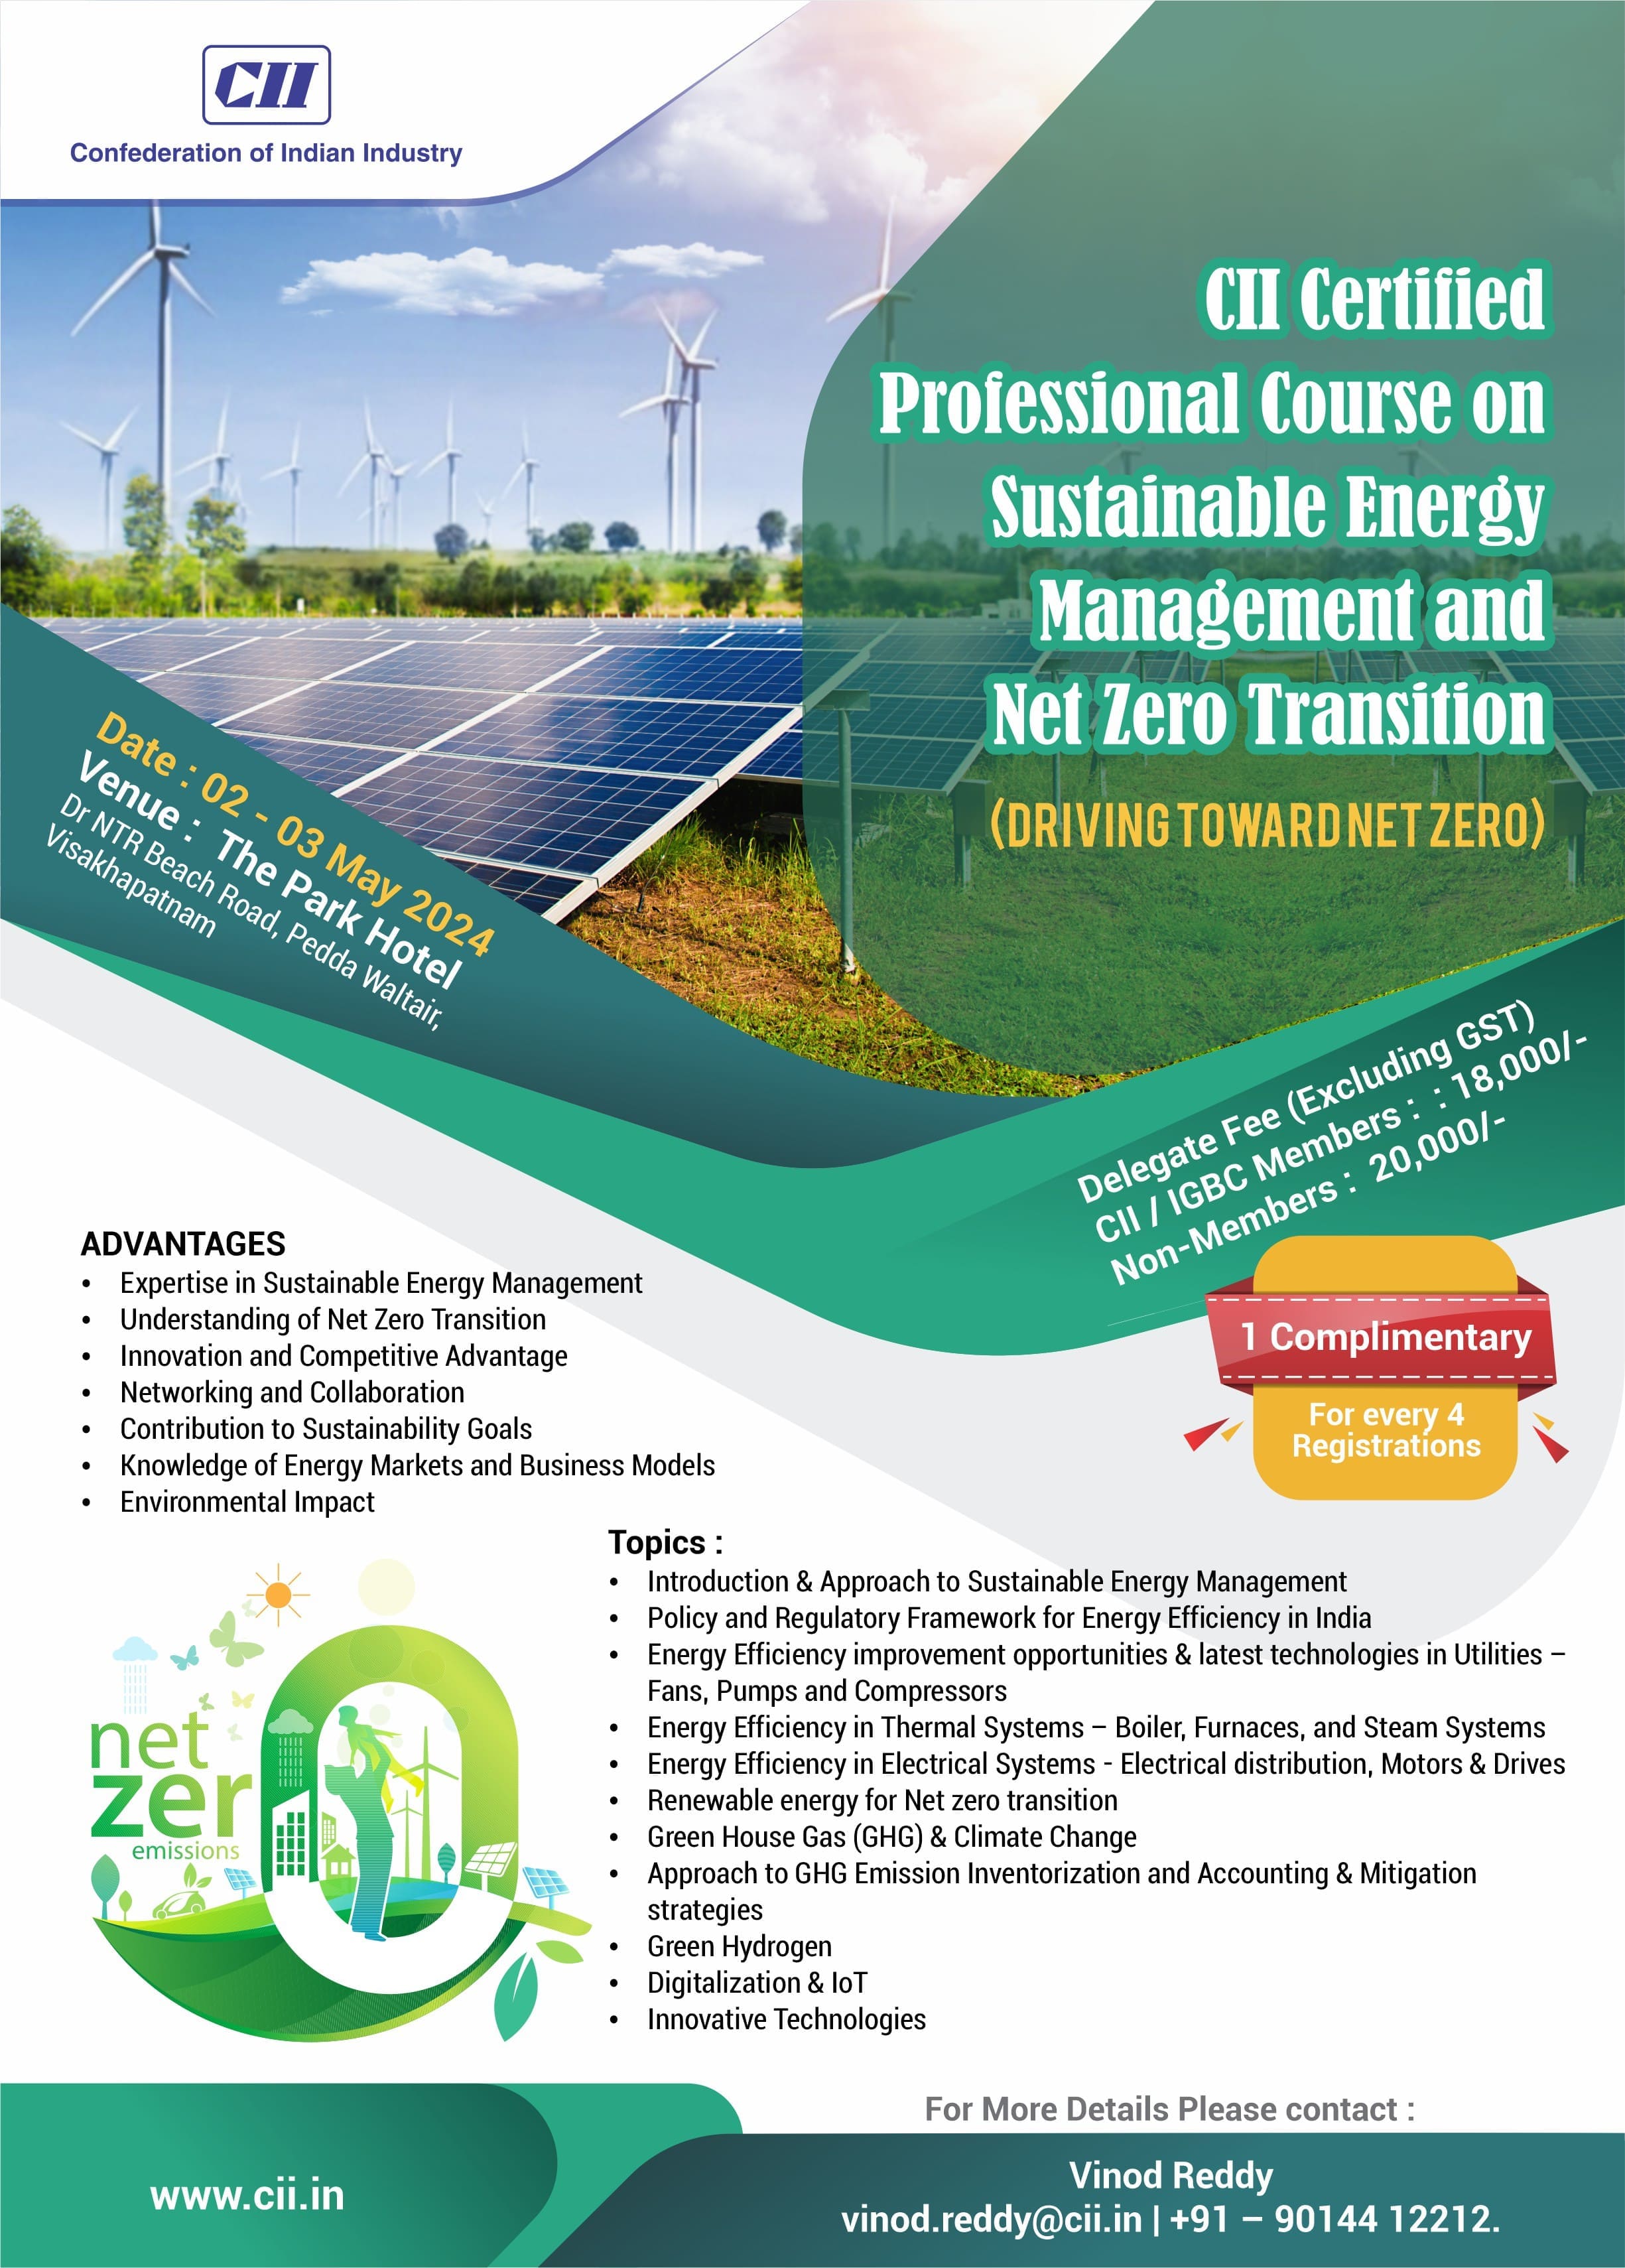 CII CERTIFIED PROFESSIONAL COURSE ON SUSTAINABLE ENERGY MANAGEMENT AND NET ZERO TRANSITION